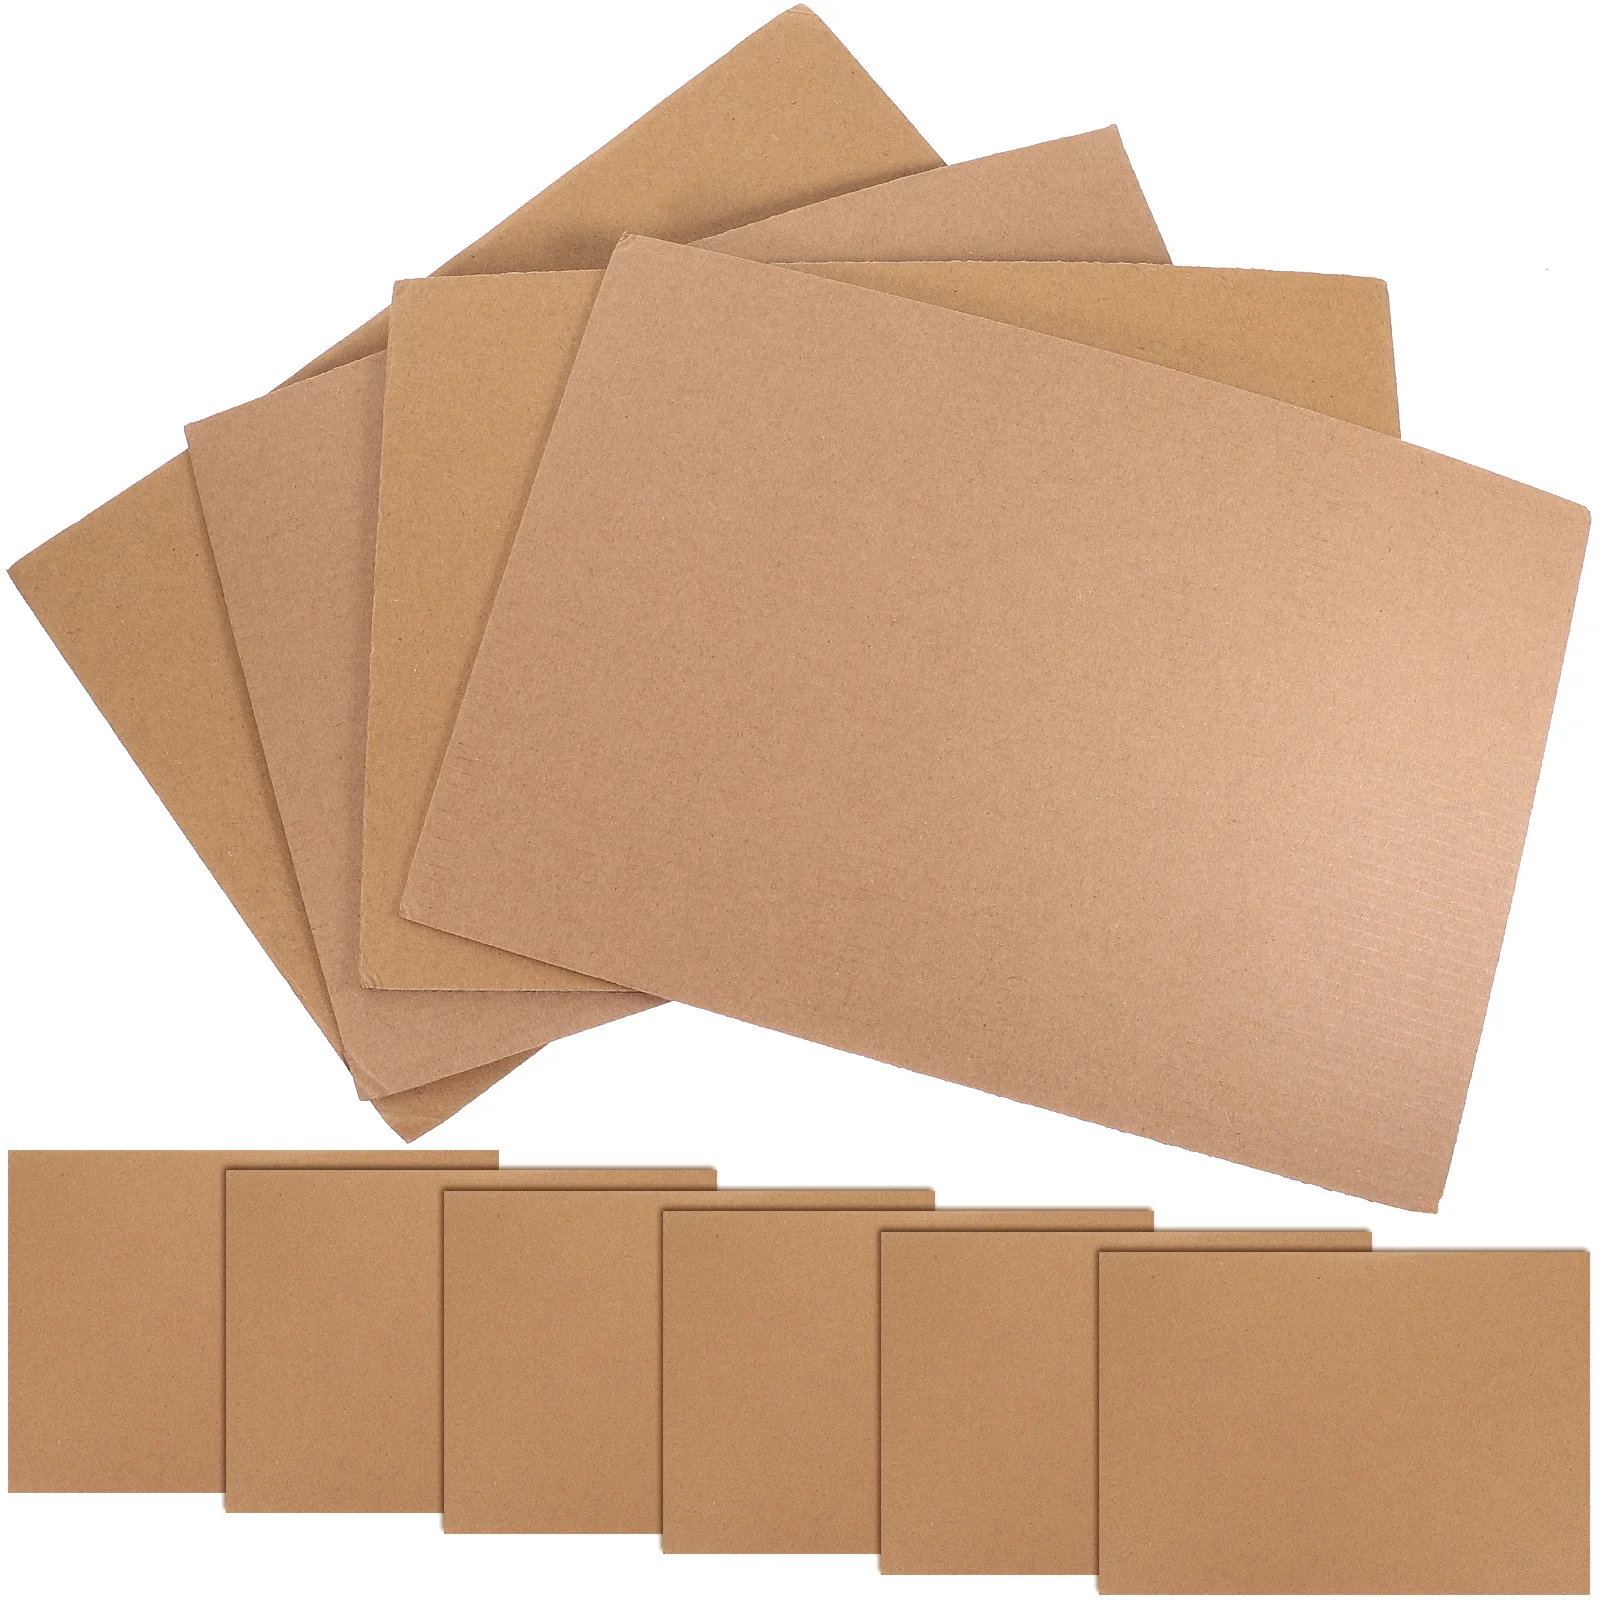 

10 Sheets Corrugated Cardboard Express Packaging Paper Industrial A4 Size Boxes for Packing Moving DIY Gift Shipping Packages